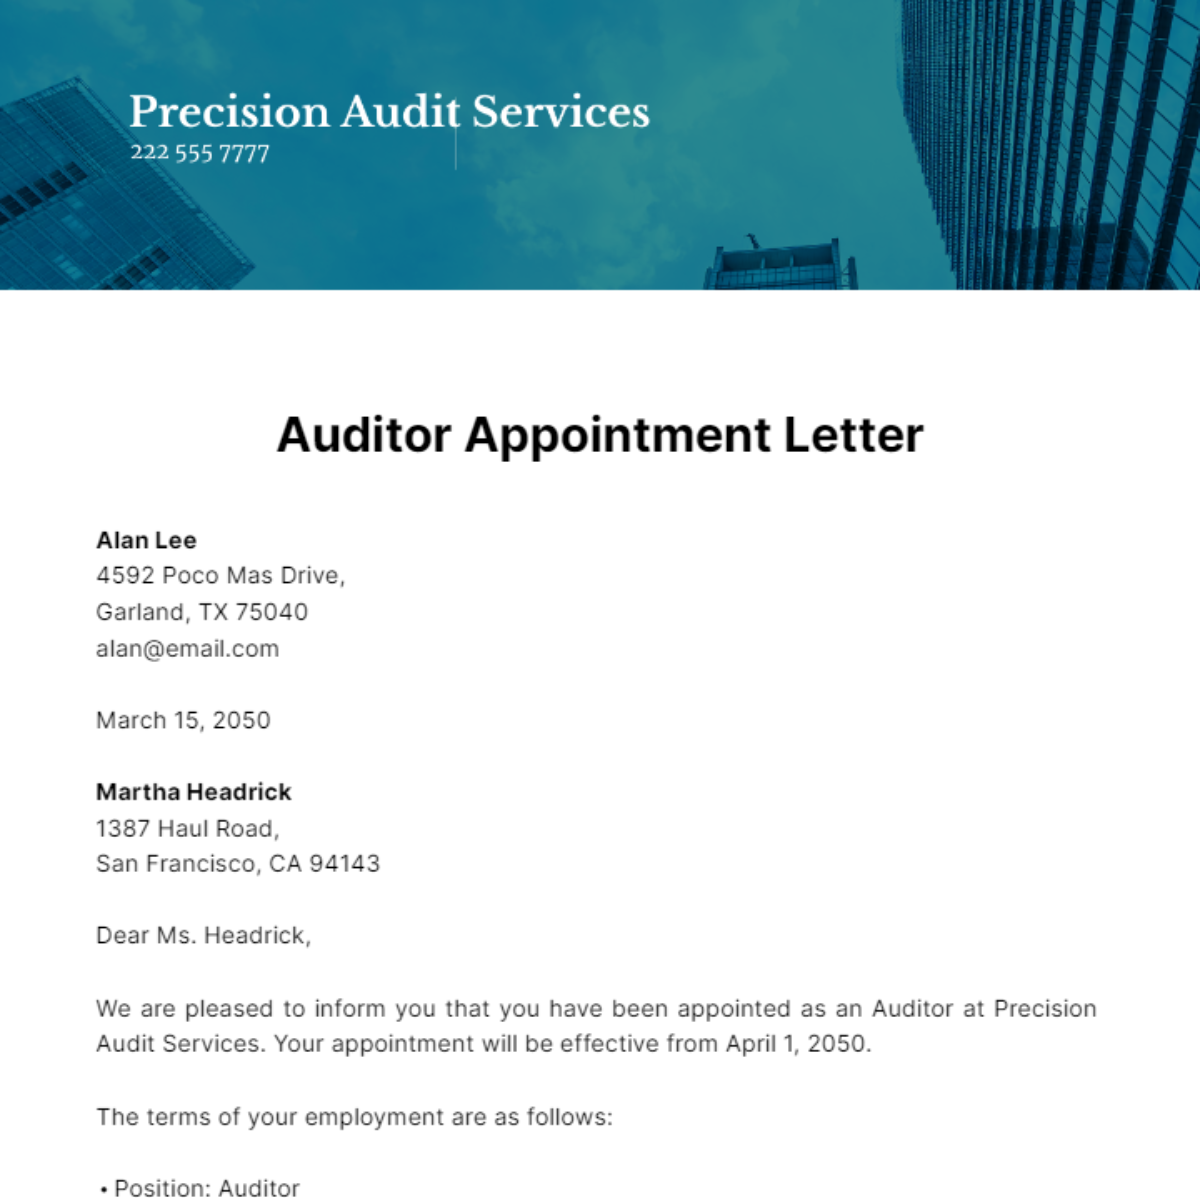 Auditor Appointment Letter Template